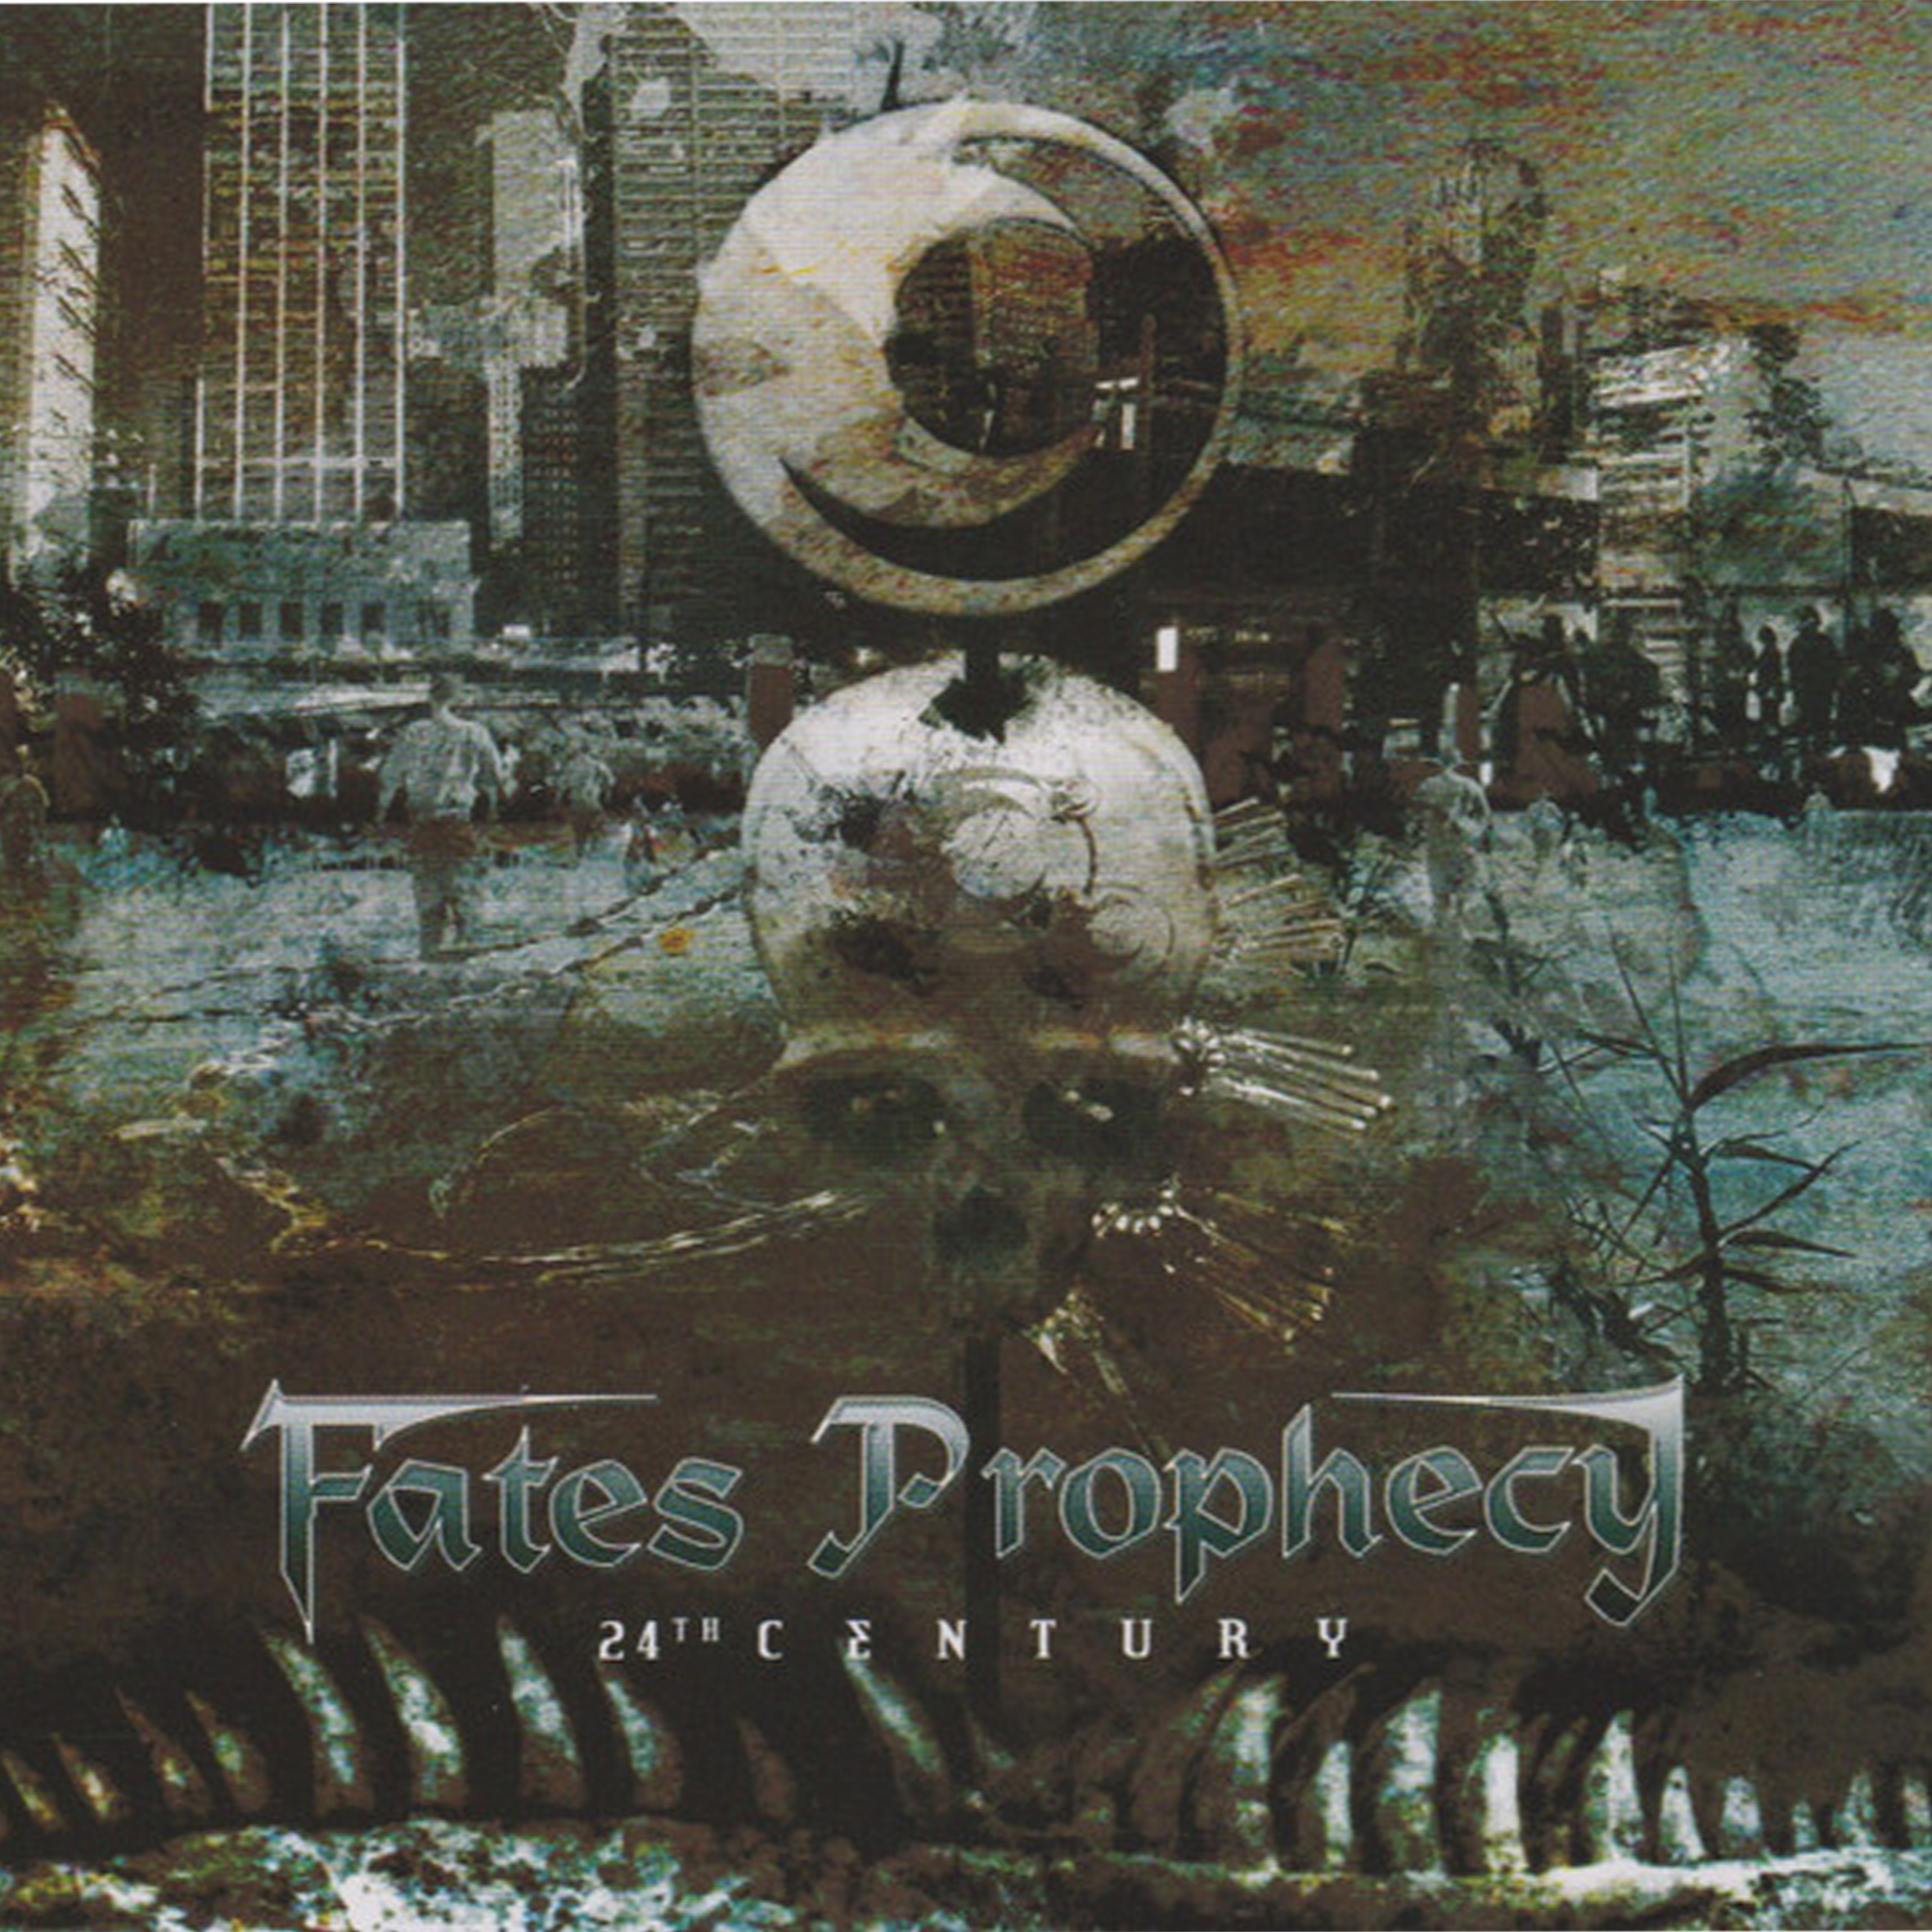 CD - Fates Prophecy - 24th Century